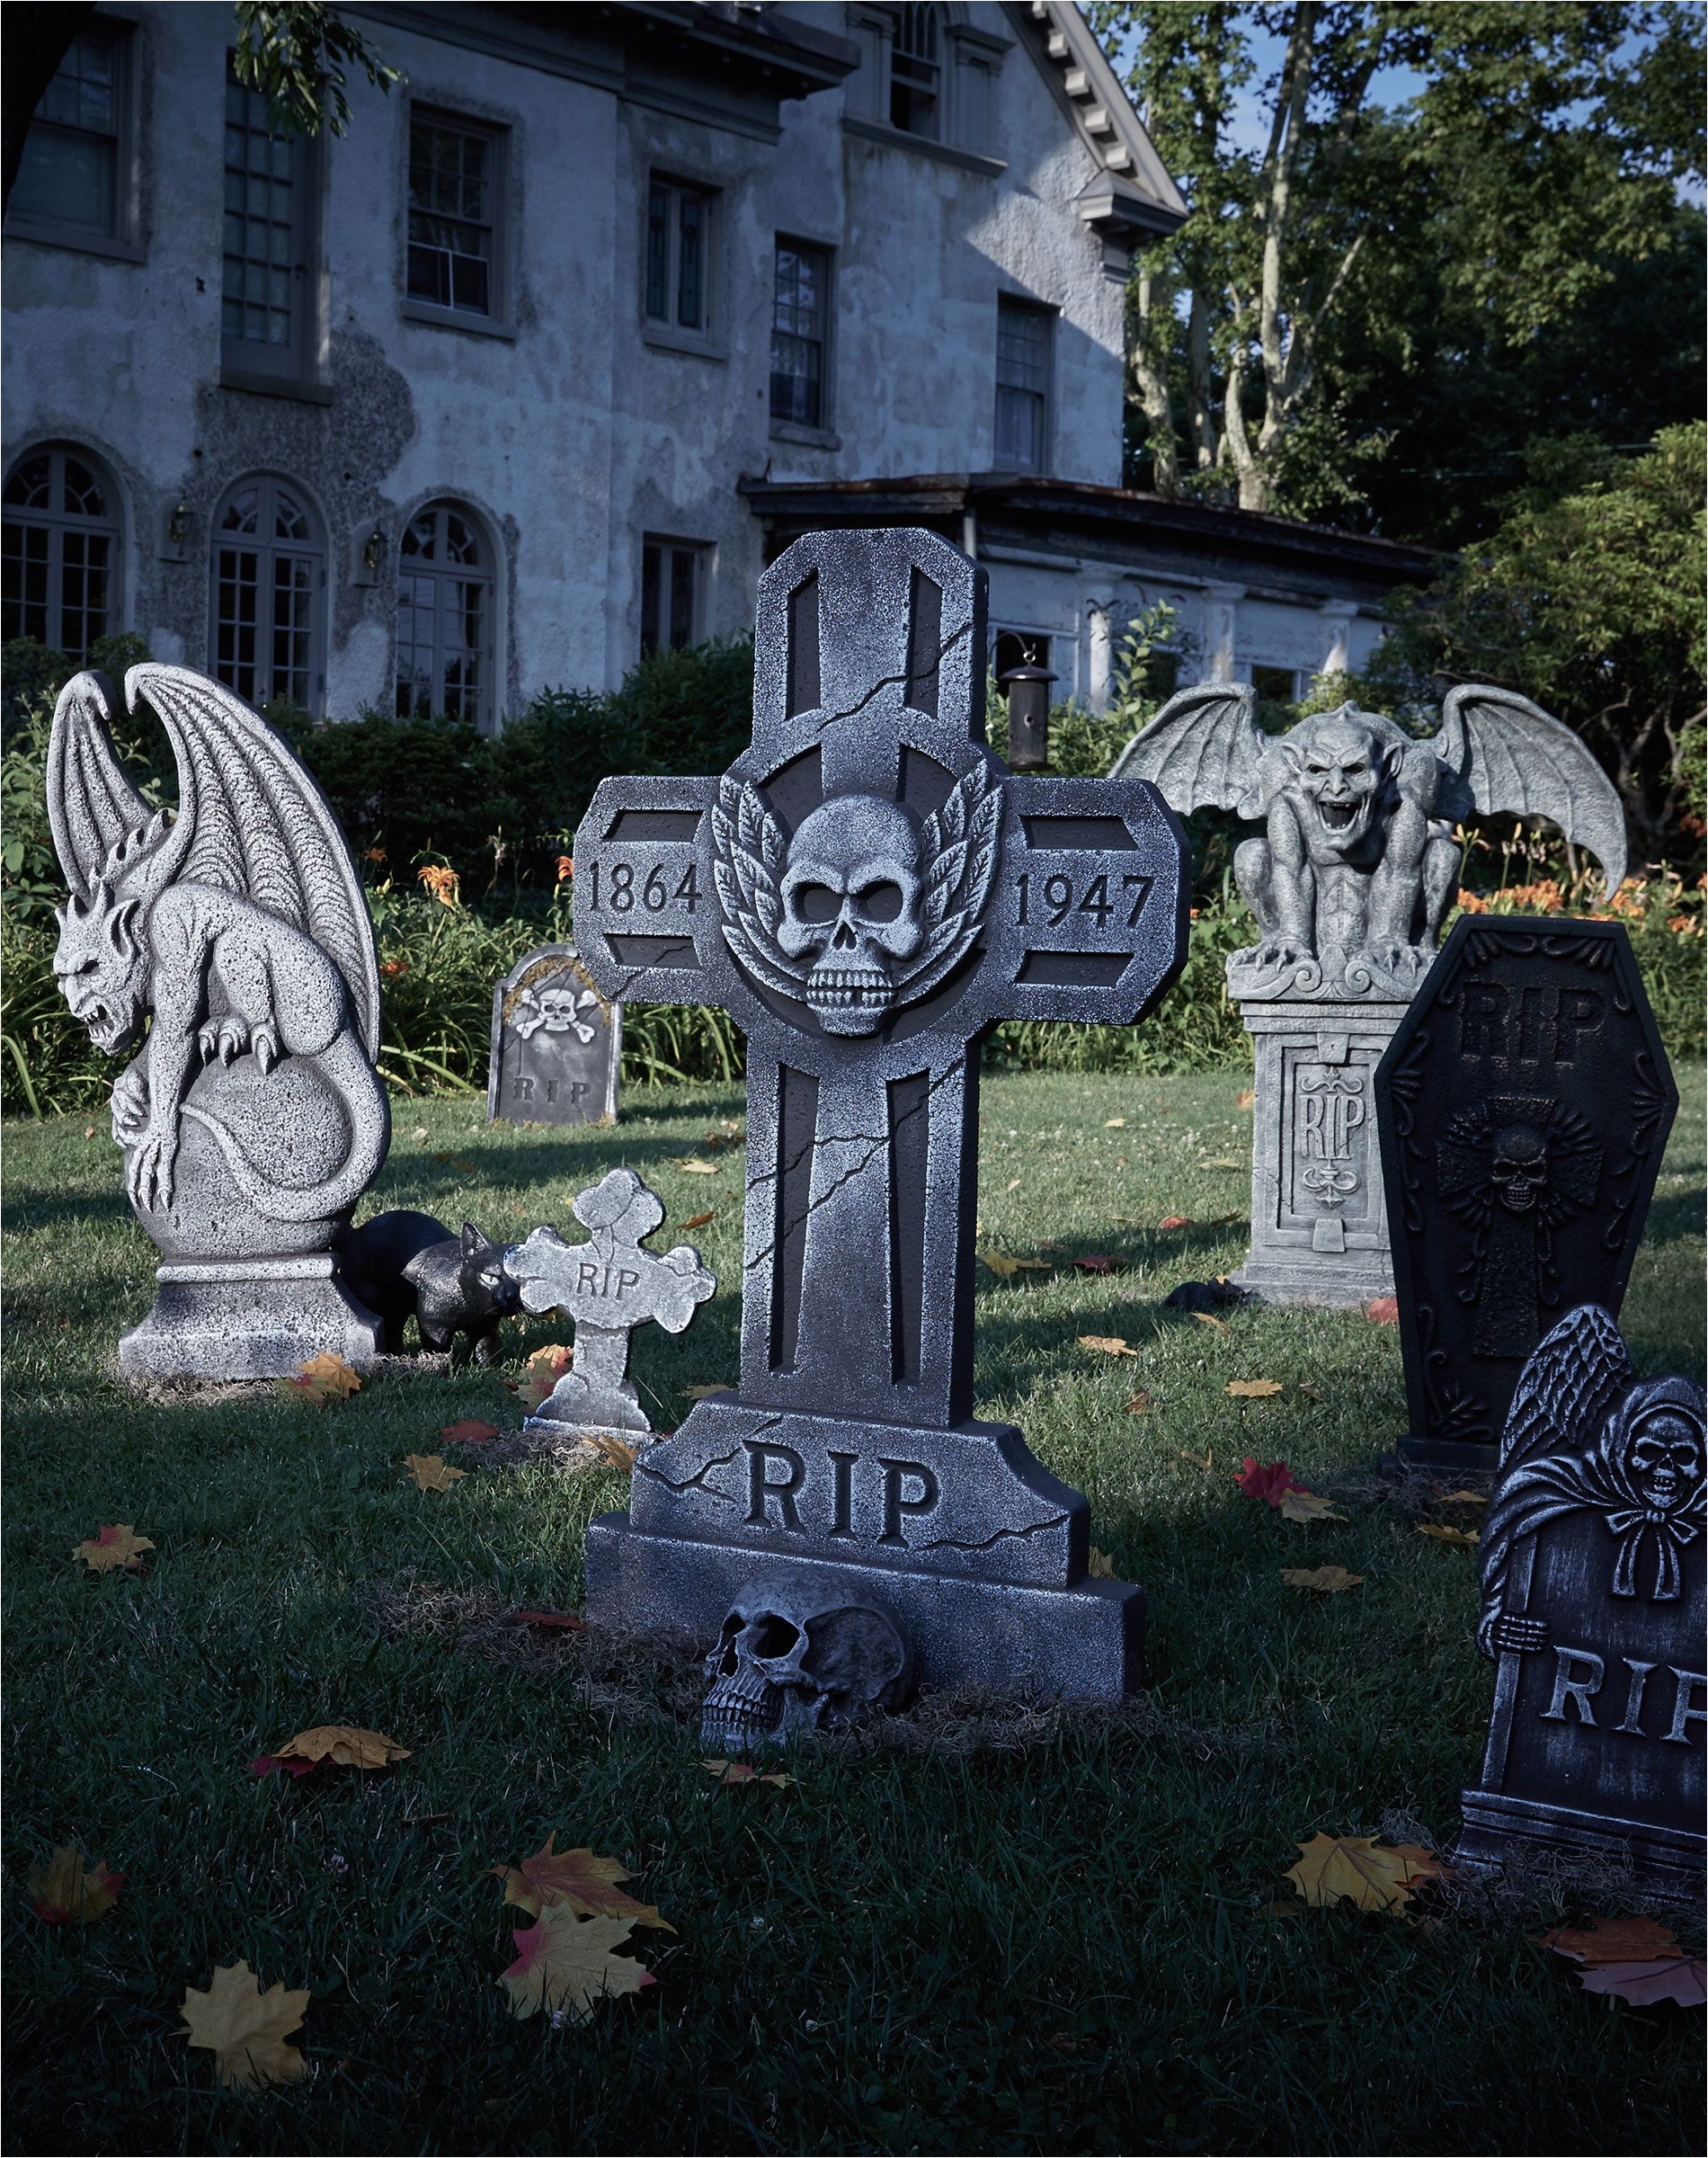 make your home the spookiest one on the block with a creepy graveyard scene